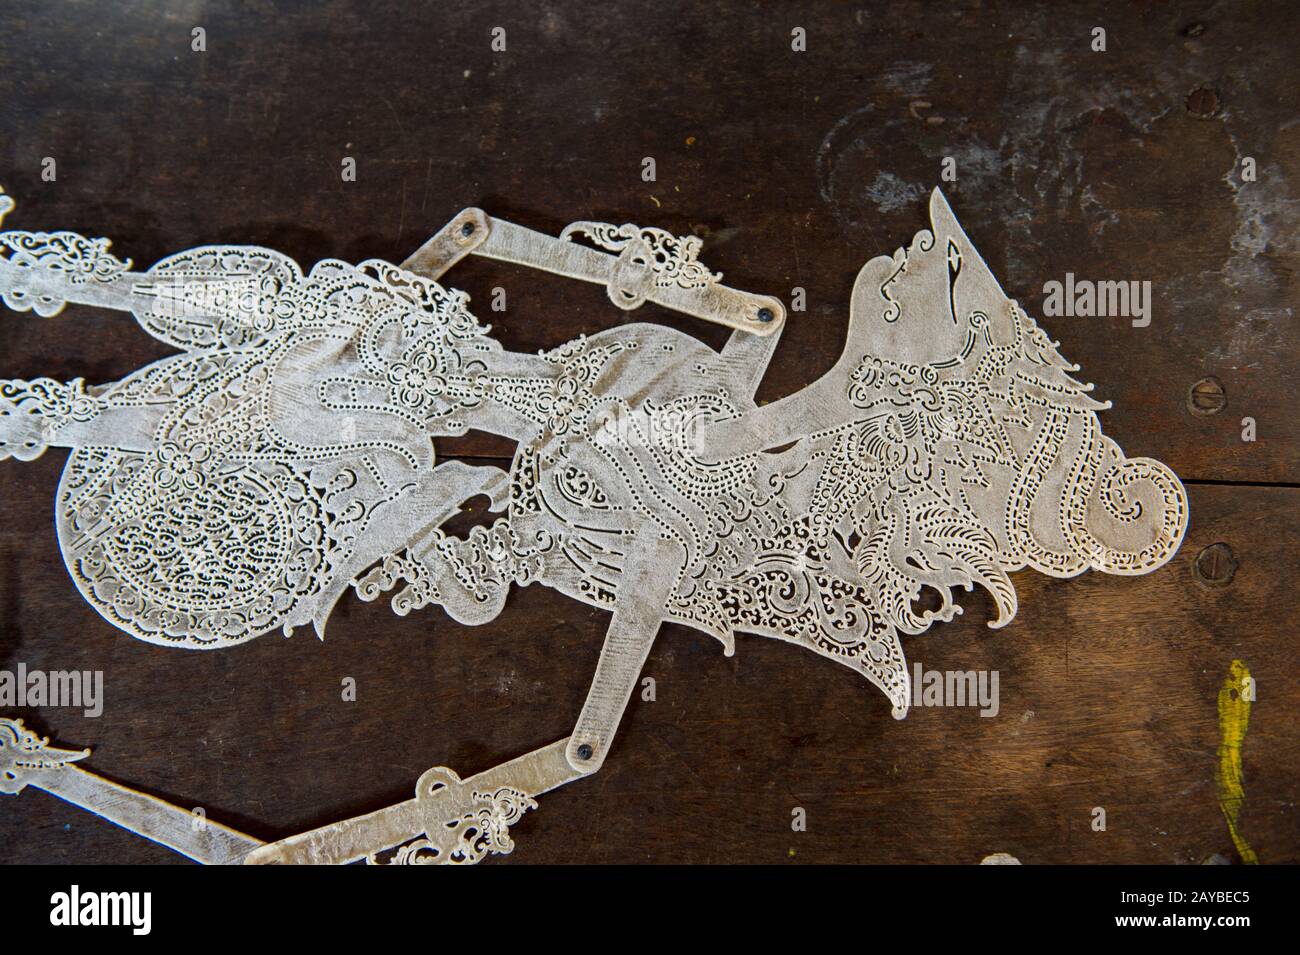 Close-up of an unpainted traditional Javanese wayang kulit (shadow puppet) made out of leather in Yogyakarta, Java, Indonesia. Stock Photo